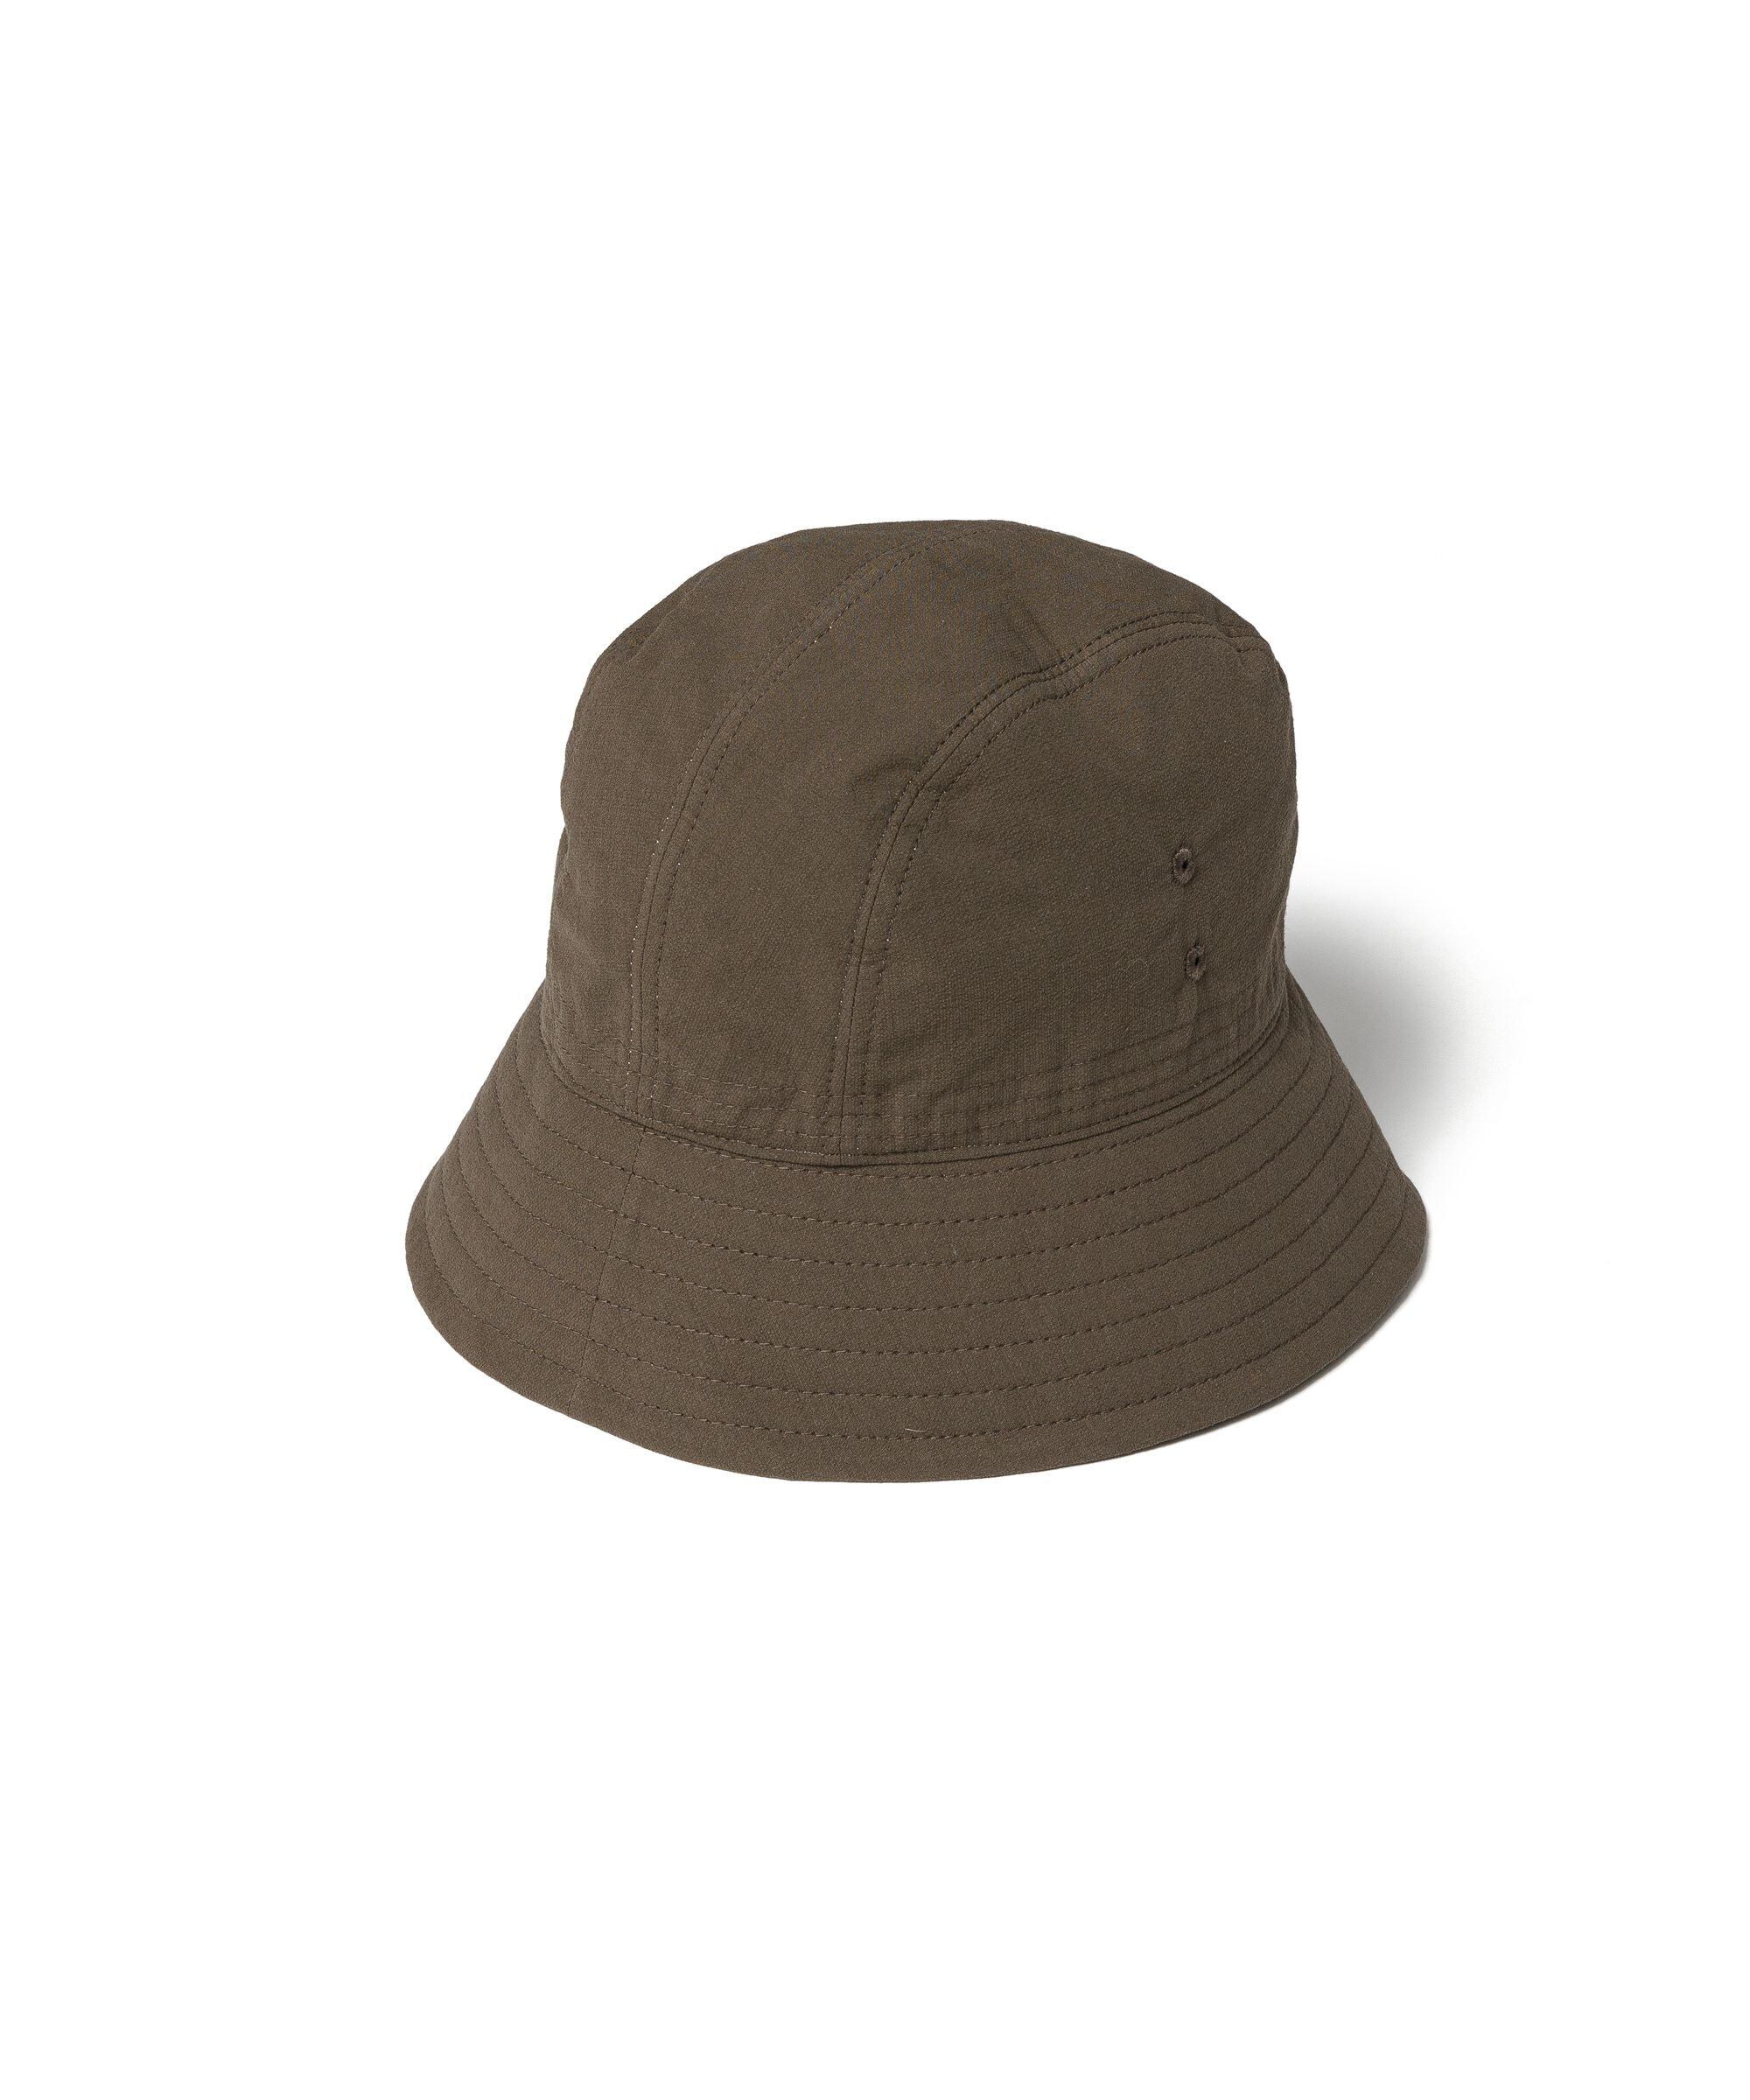 【FILL THE BILL】SAILOR HAT (OLIVE) | HEIGHTS Online Store powered by BASE